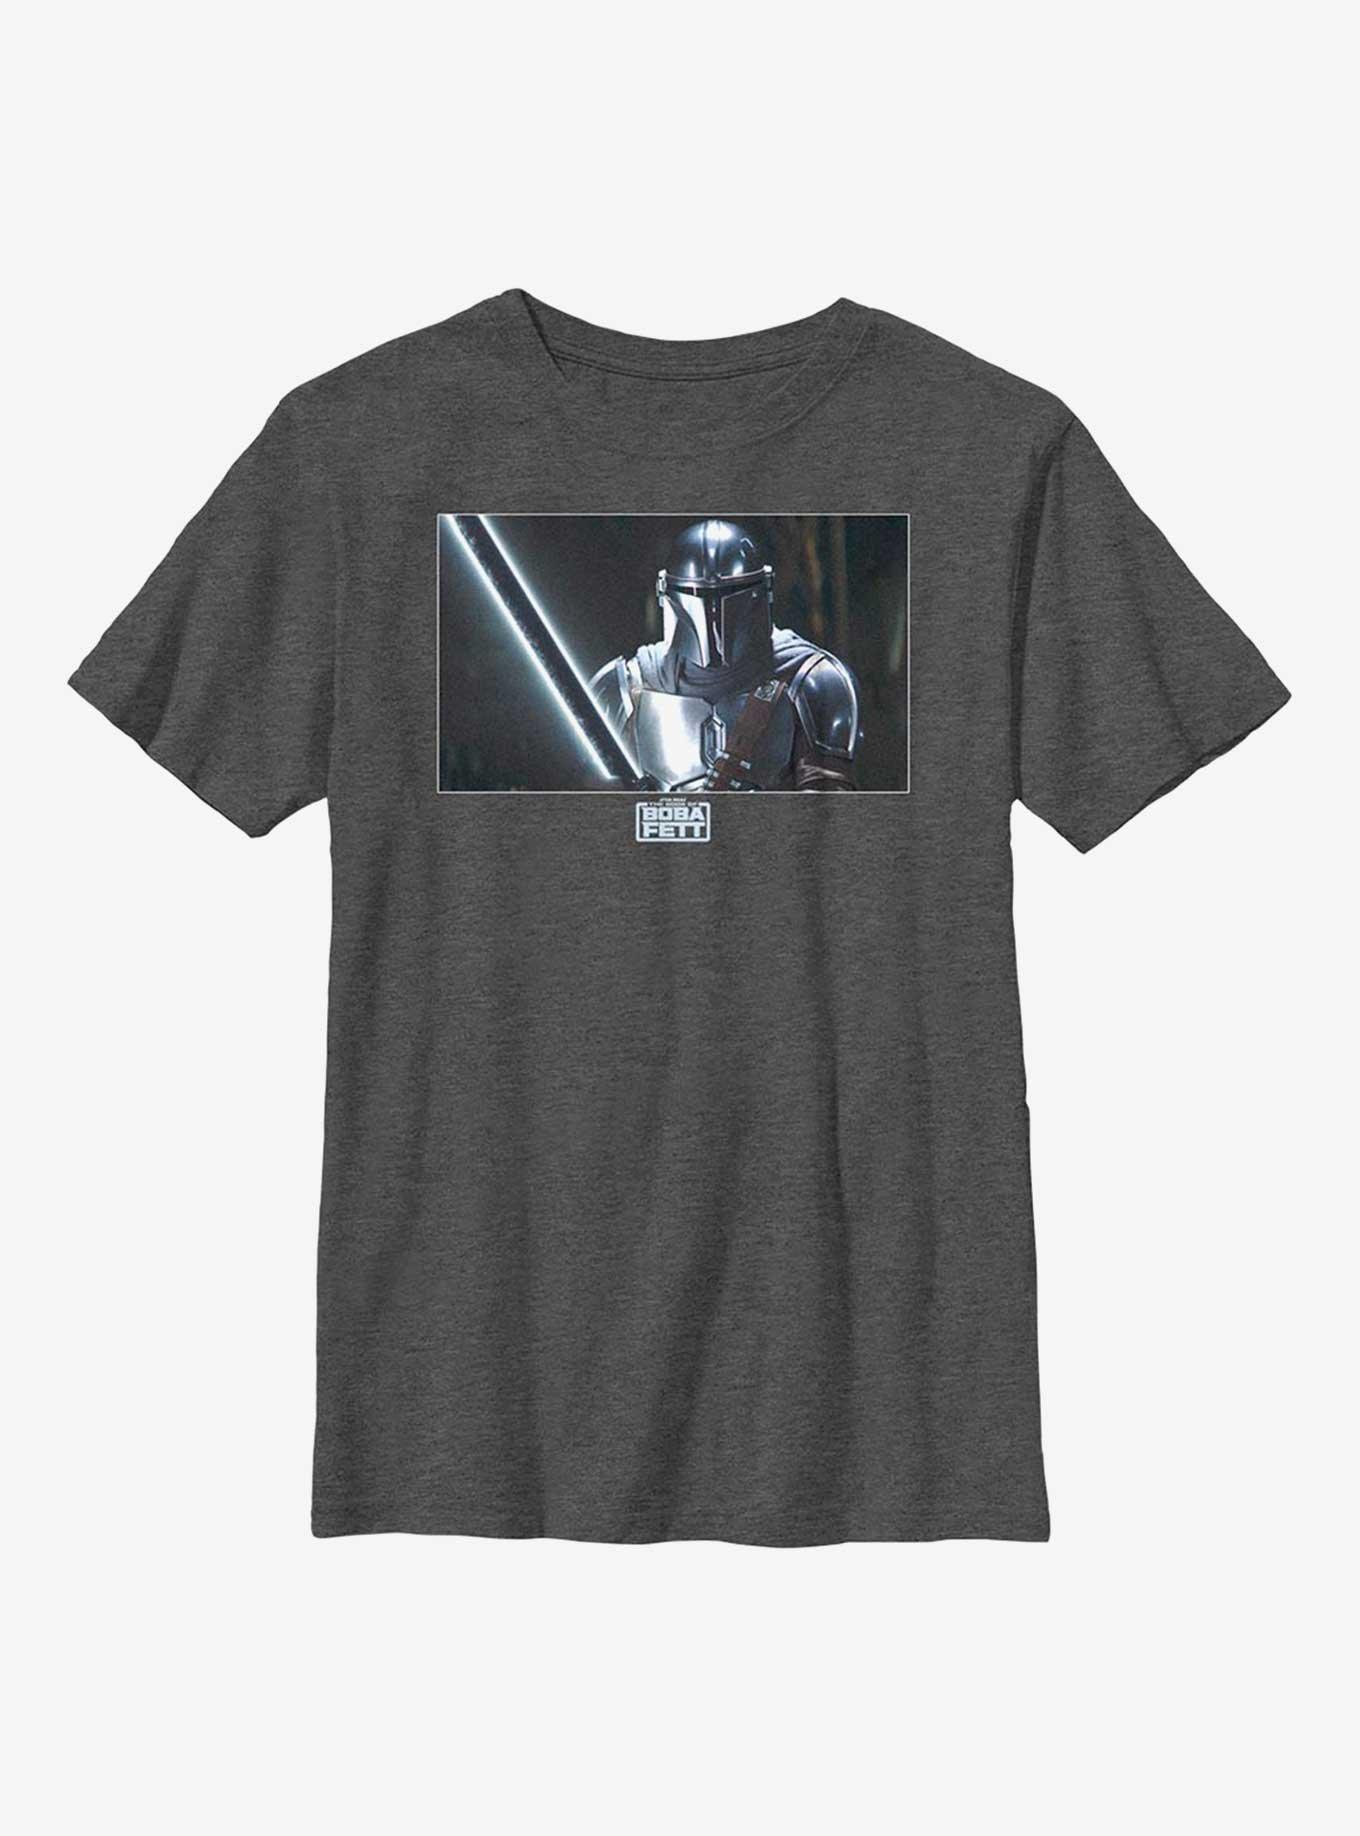 Star Wars The Book Of Boba Fett Warm Or Cold Youth T-Shirt, CHAR HTR, hi-res